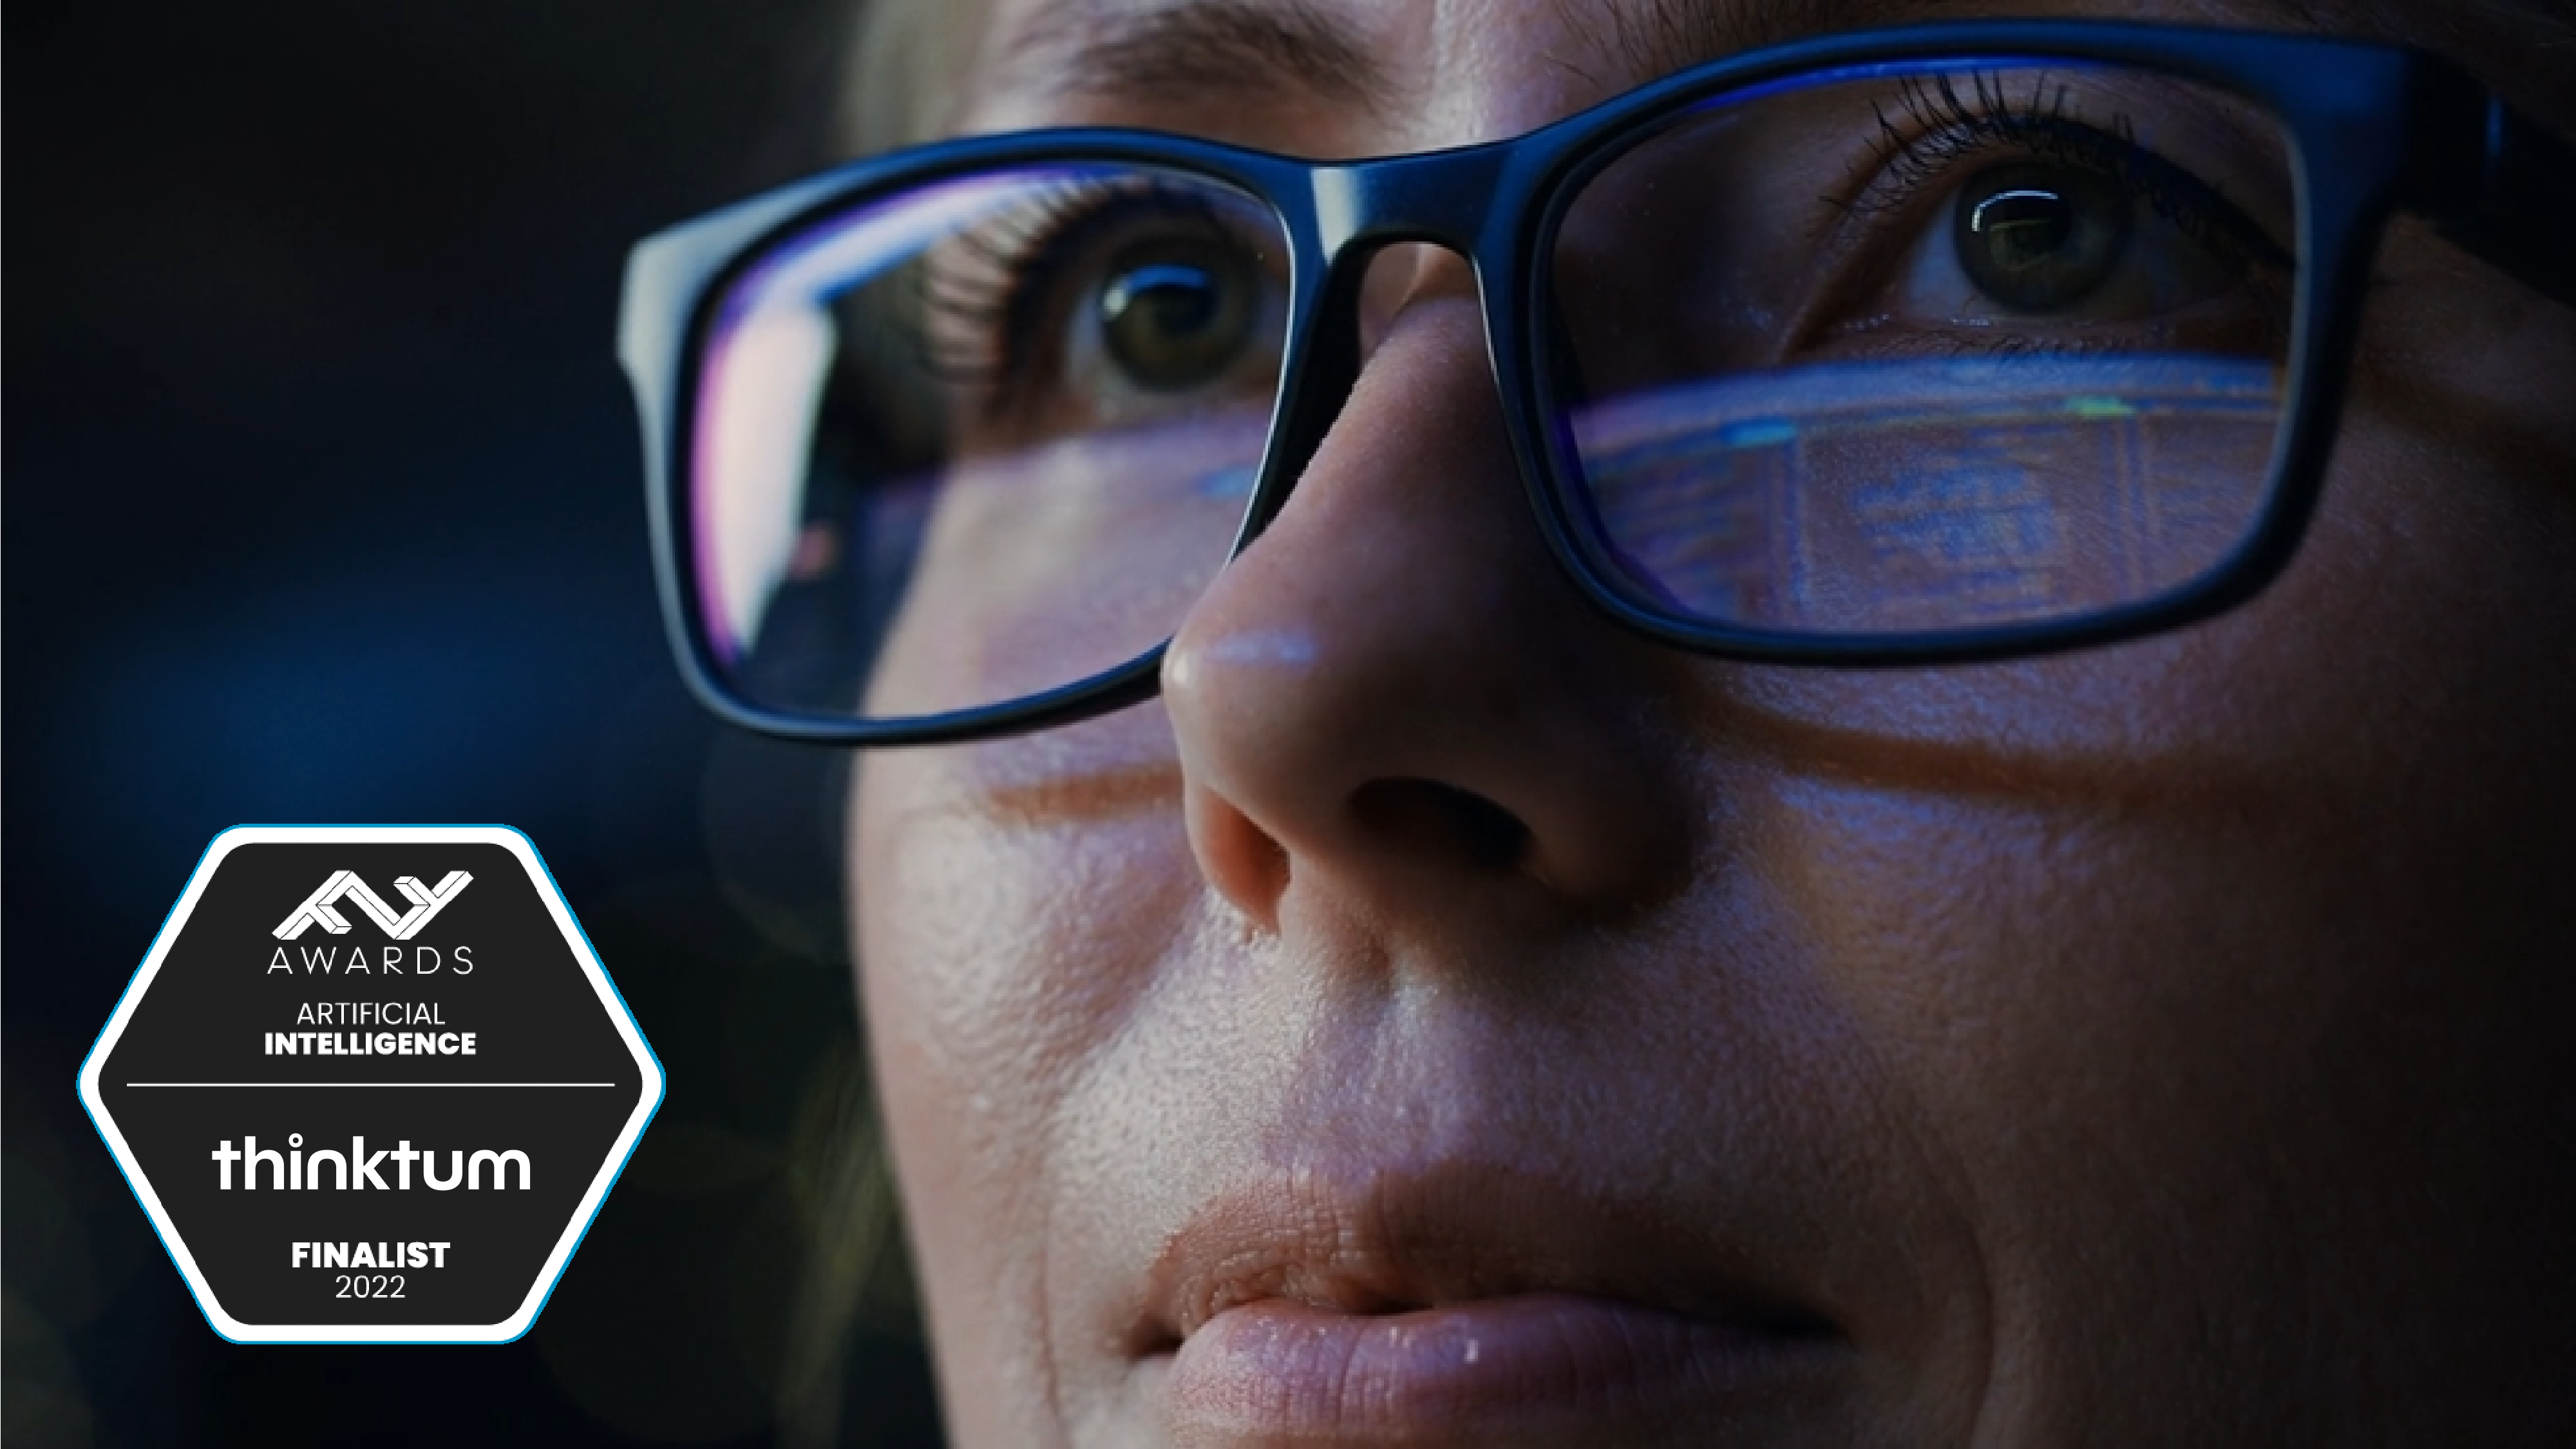 A close up of a person wearing glasses and looking away with a six-sided badge that reads: FF Awards Artificial Intelligence and thinktum with finalist 2022.